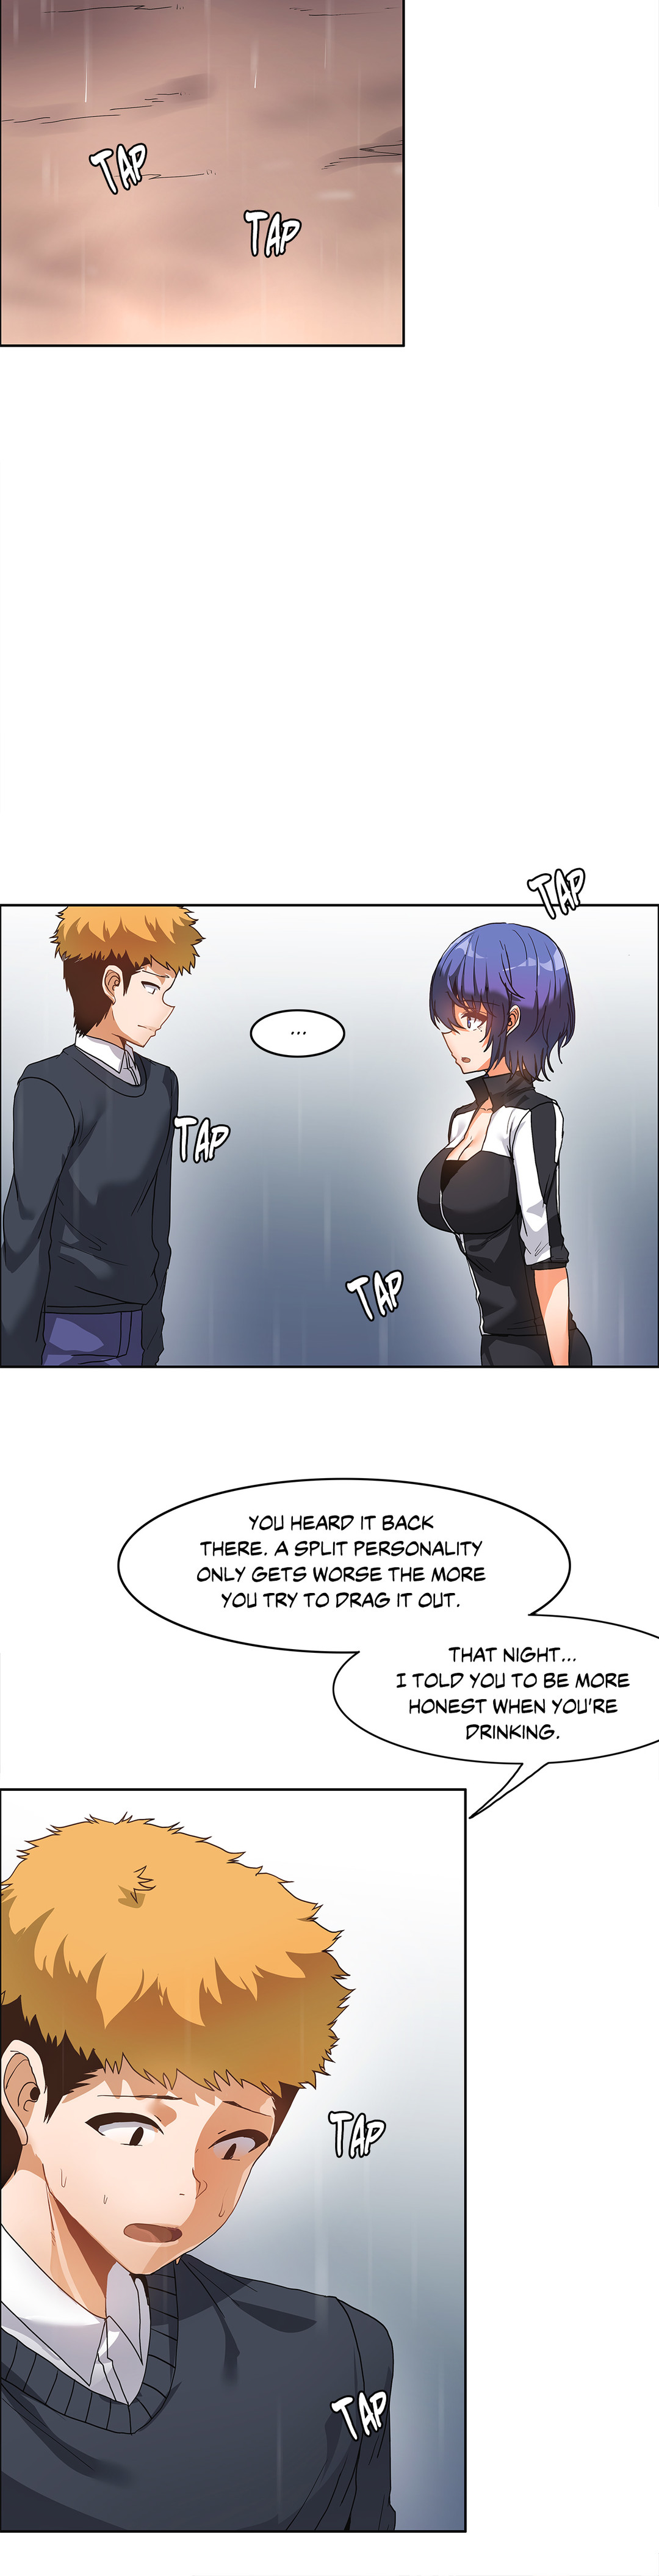 The Girl That Wet the Wall Ch 51 - 55 page 37 full